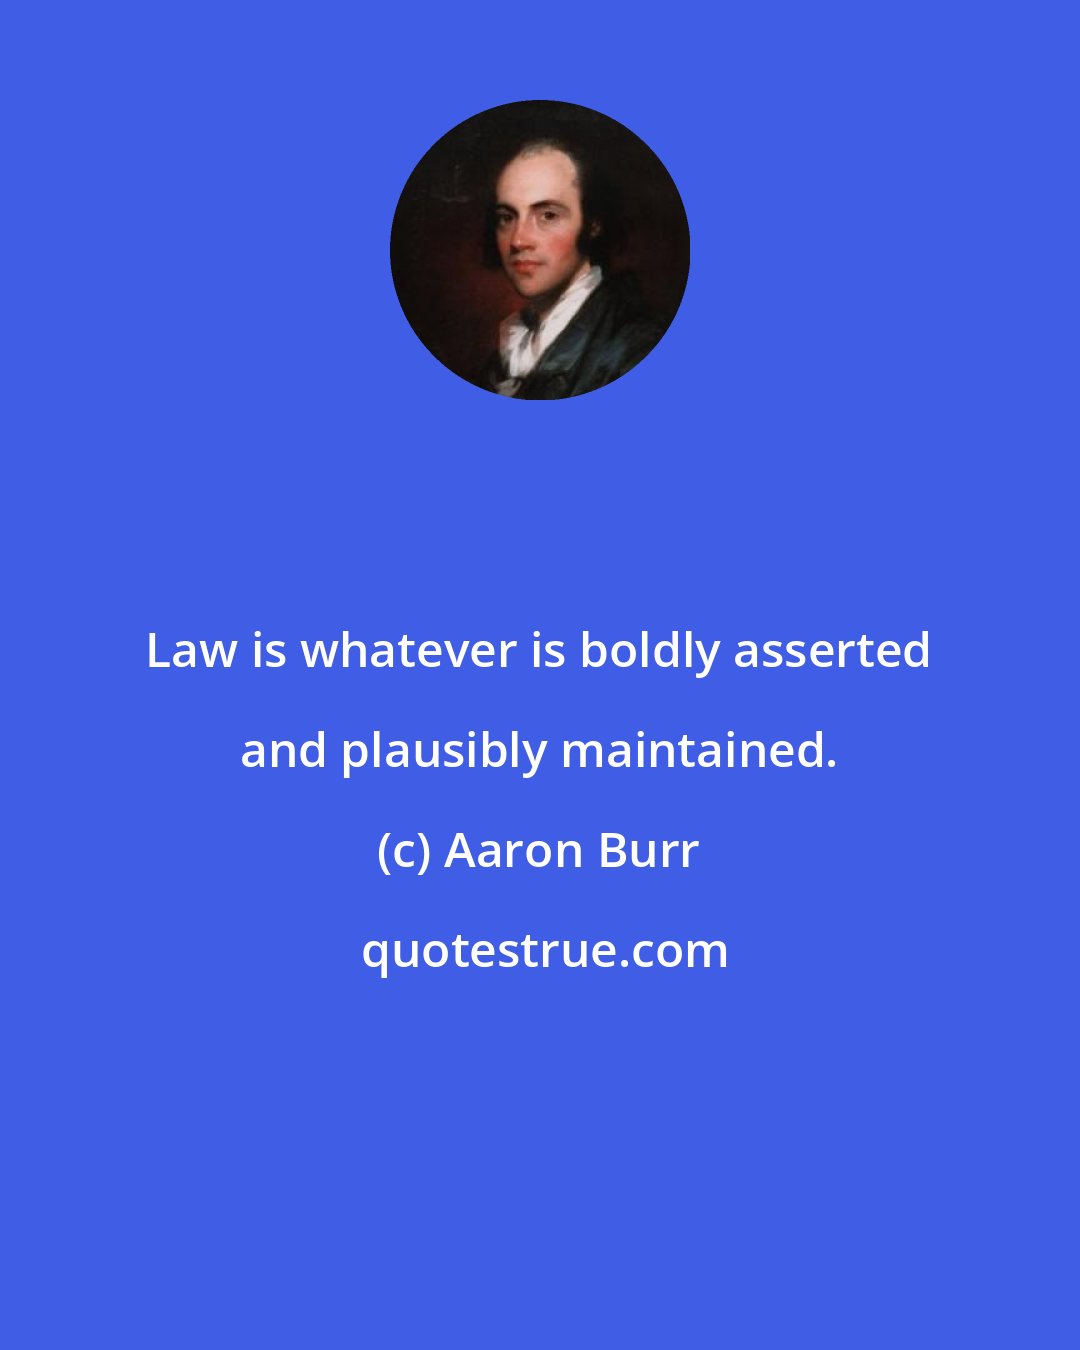 Aaron Burr: Law is whatever is boldly asserted and plausibly maintained.